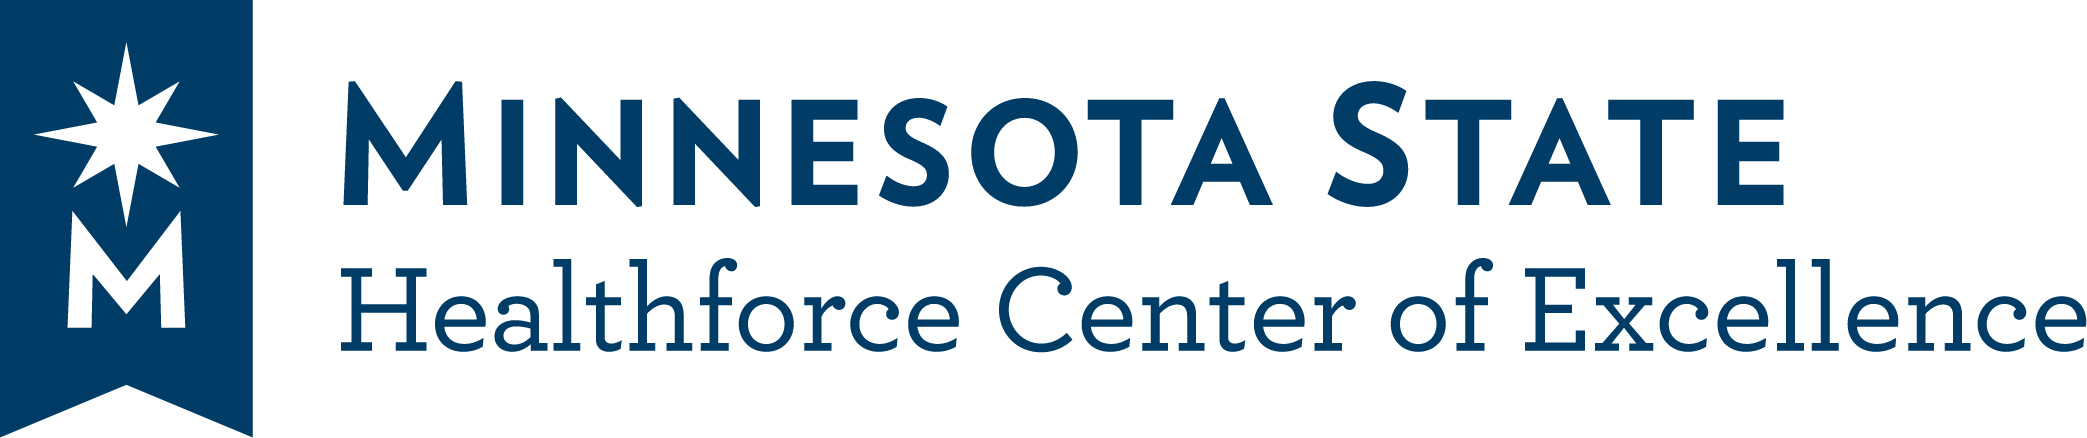 Healthforce Center of Excellence Secondary Signature